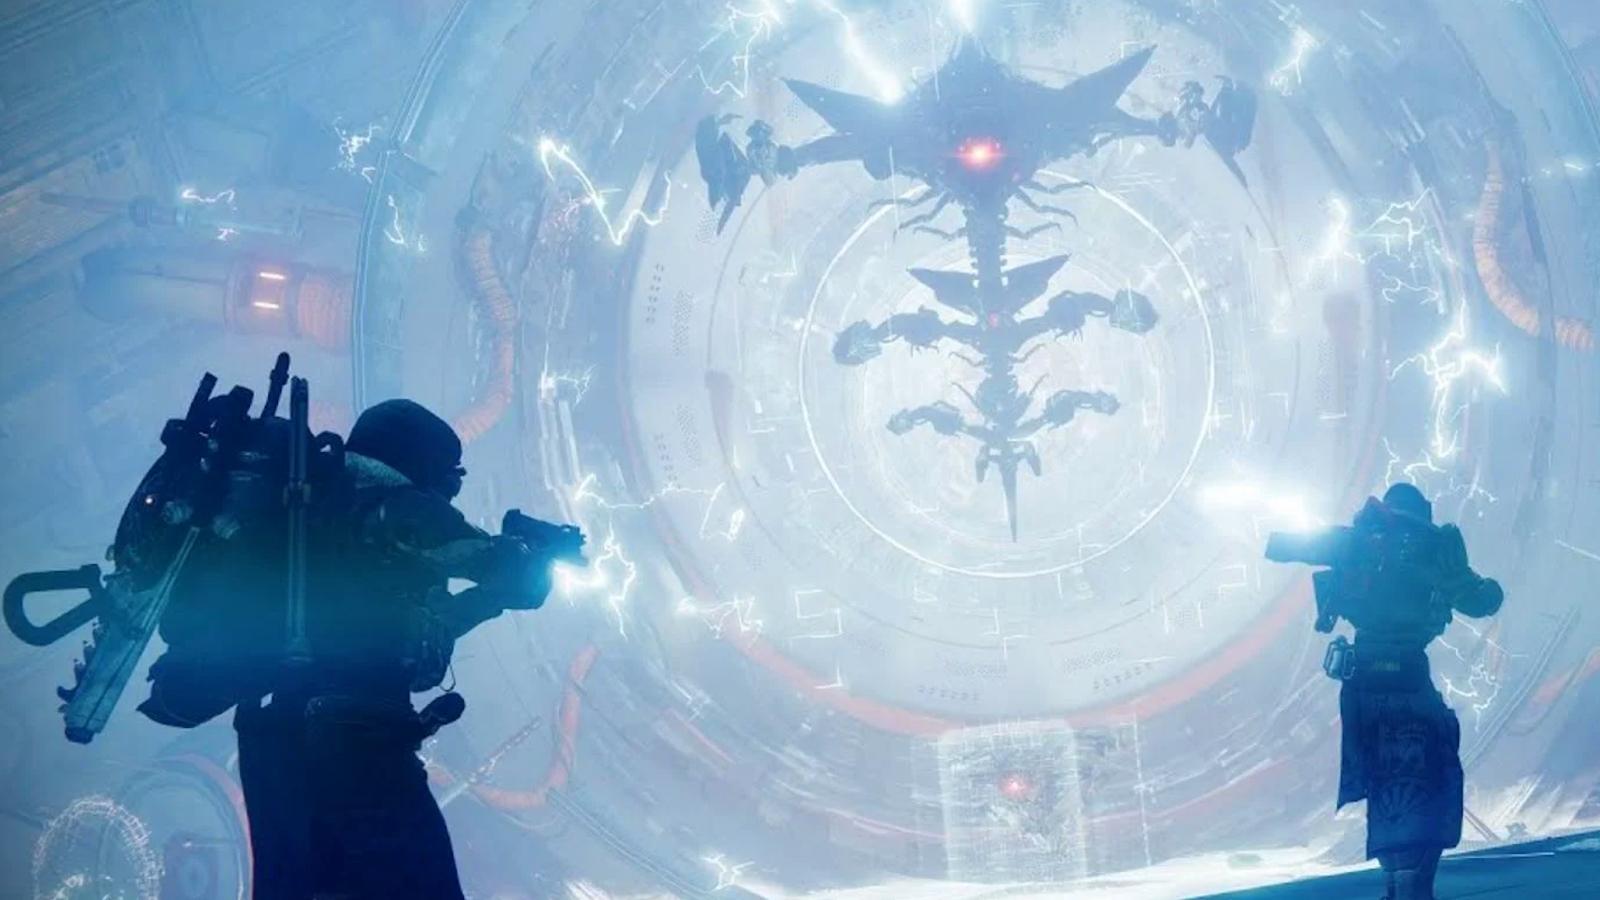 The final encounter of The Glassway Nightfall in Destiny 2.